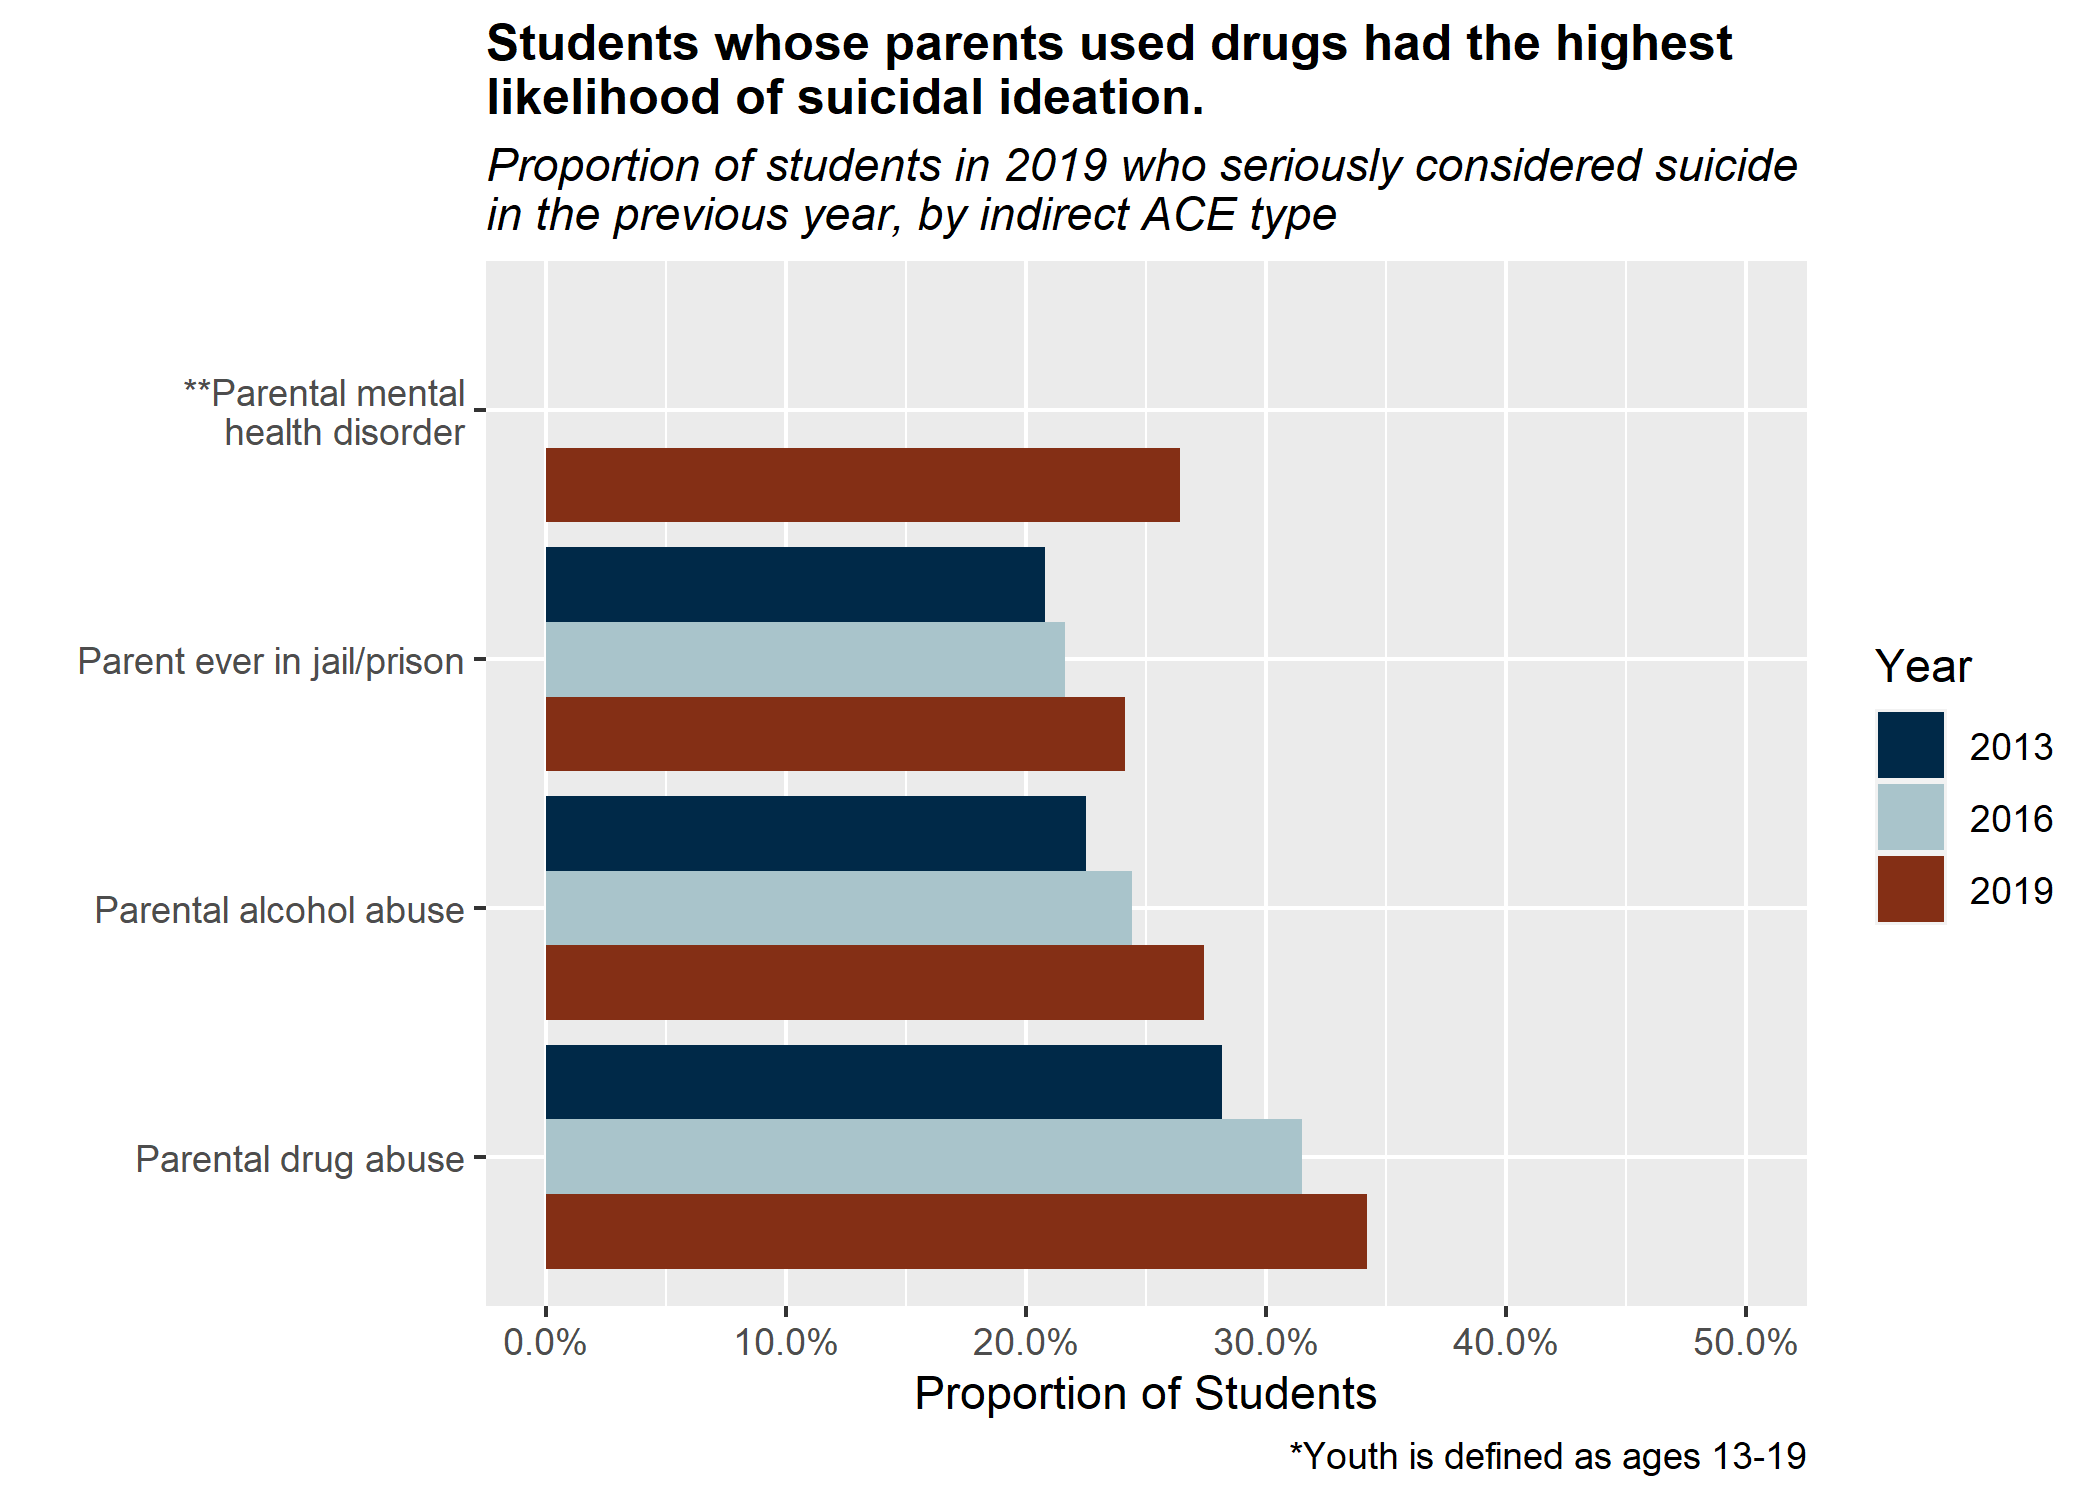 Students whose parents abuse drugs have the highest liklihood of suicidal ideation.